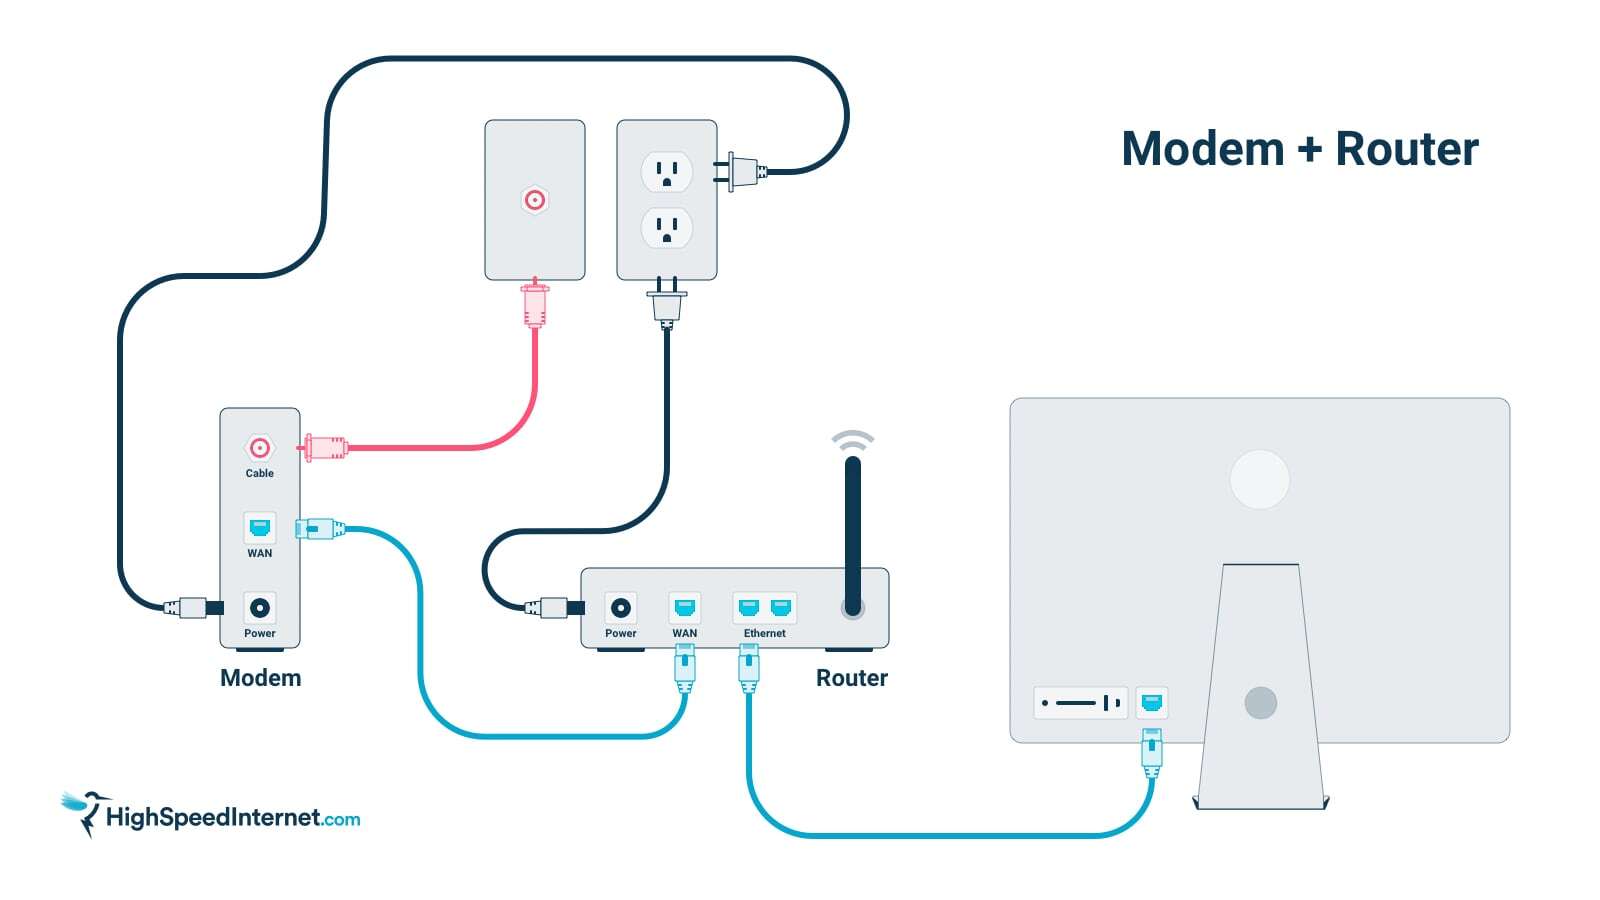 If using a wired connection, check that the Ethernet cable is securely plugged into the console and your router.
Restart your router and modem.